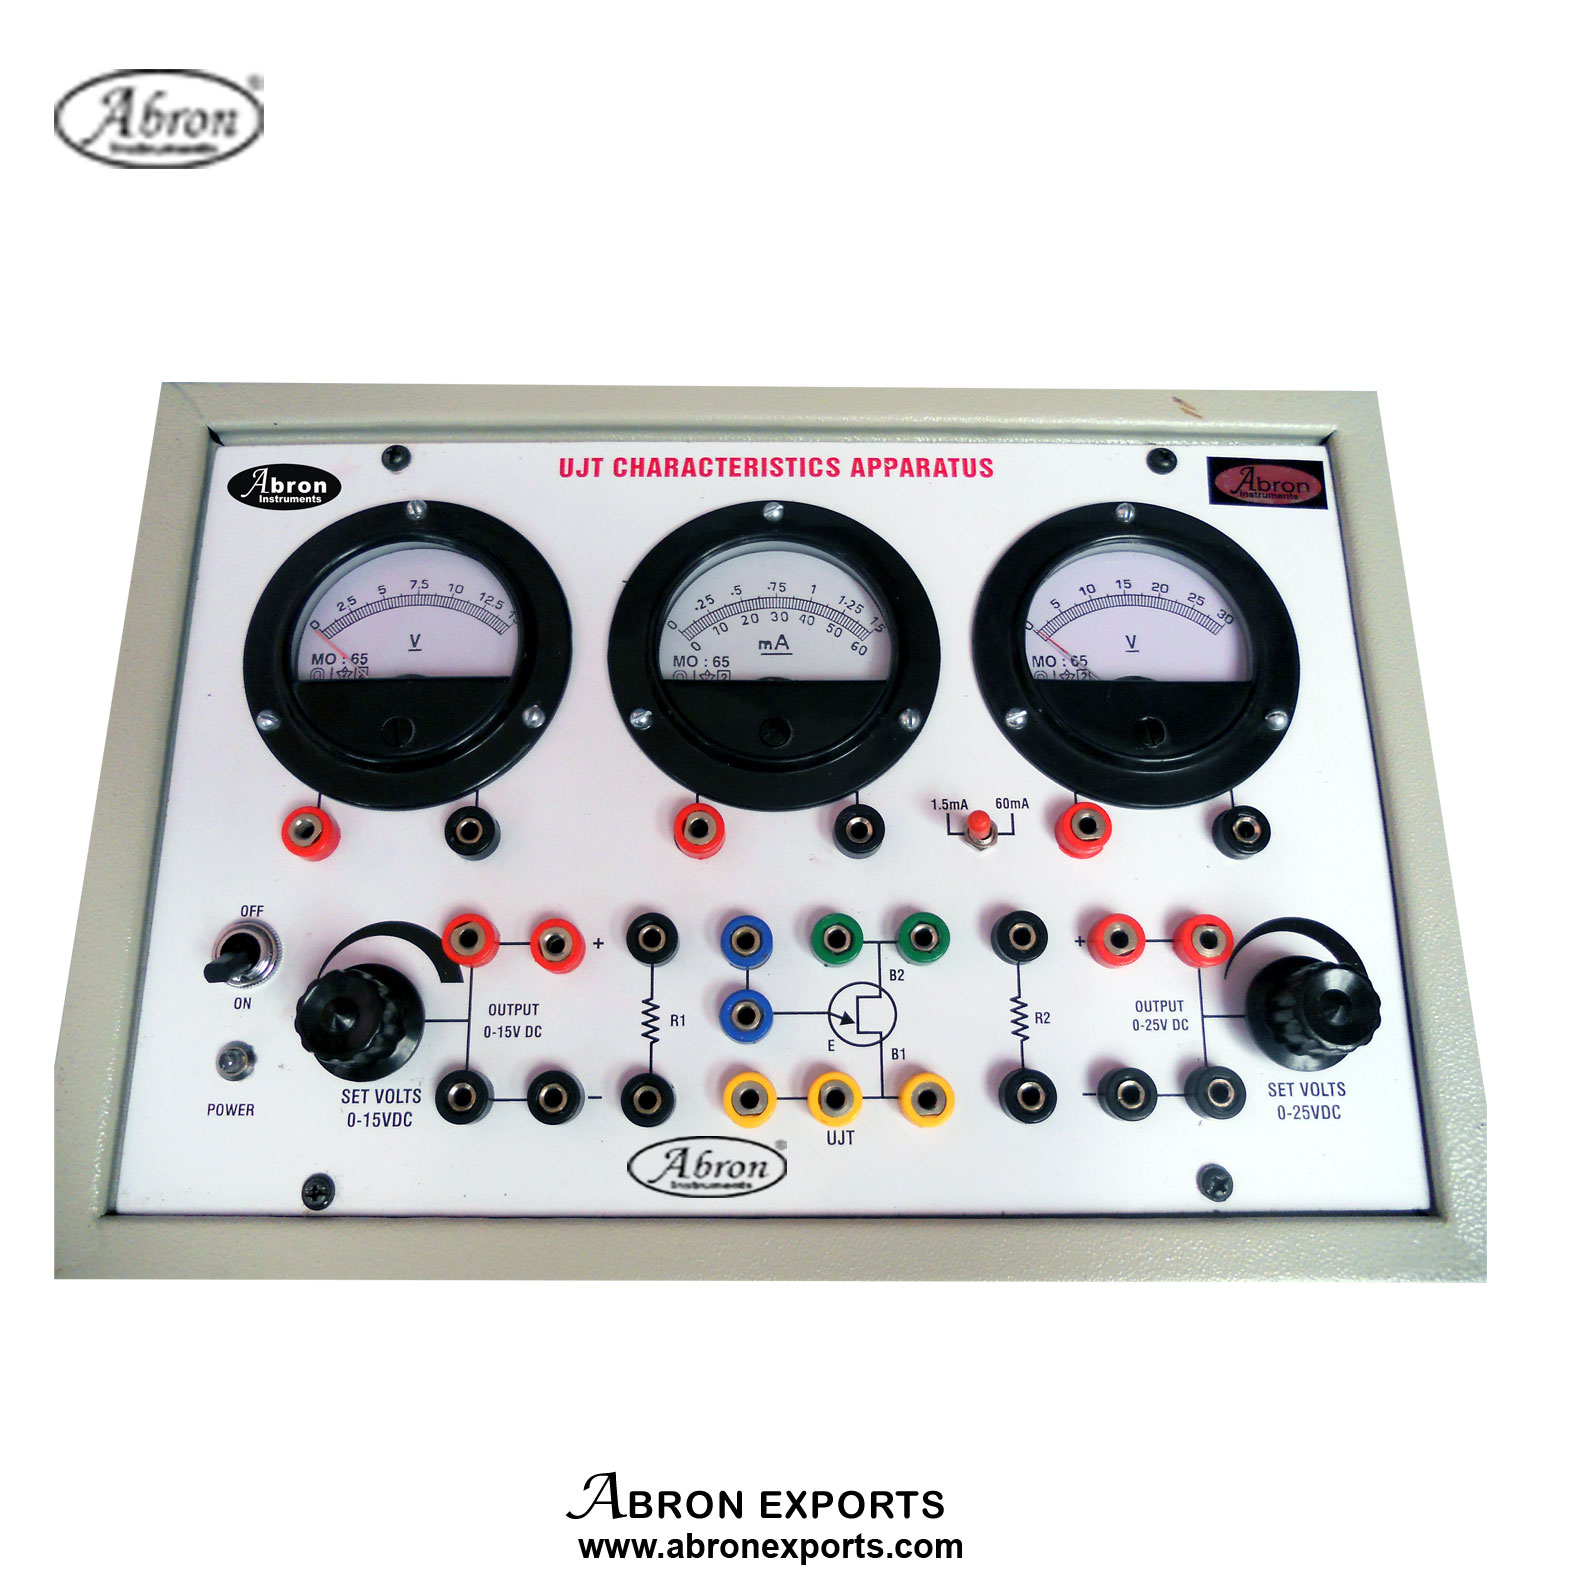 UJT Curve characteristics Apparatus 3 meter Trainer with power supply Abron